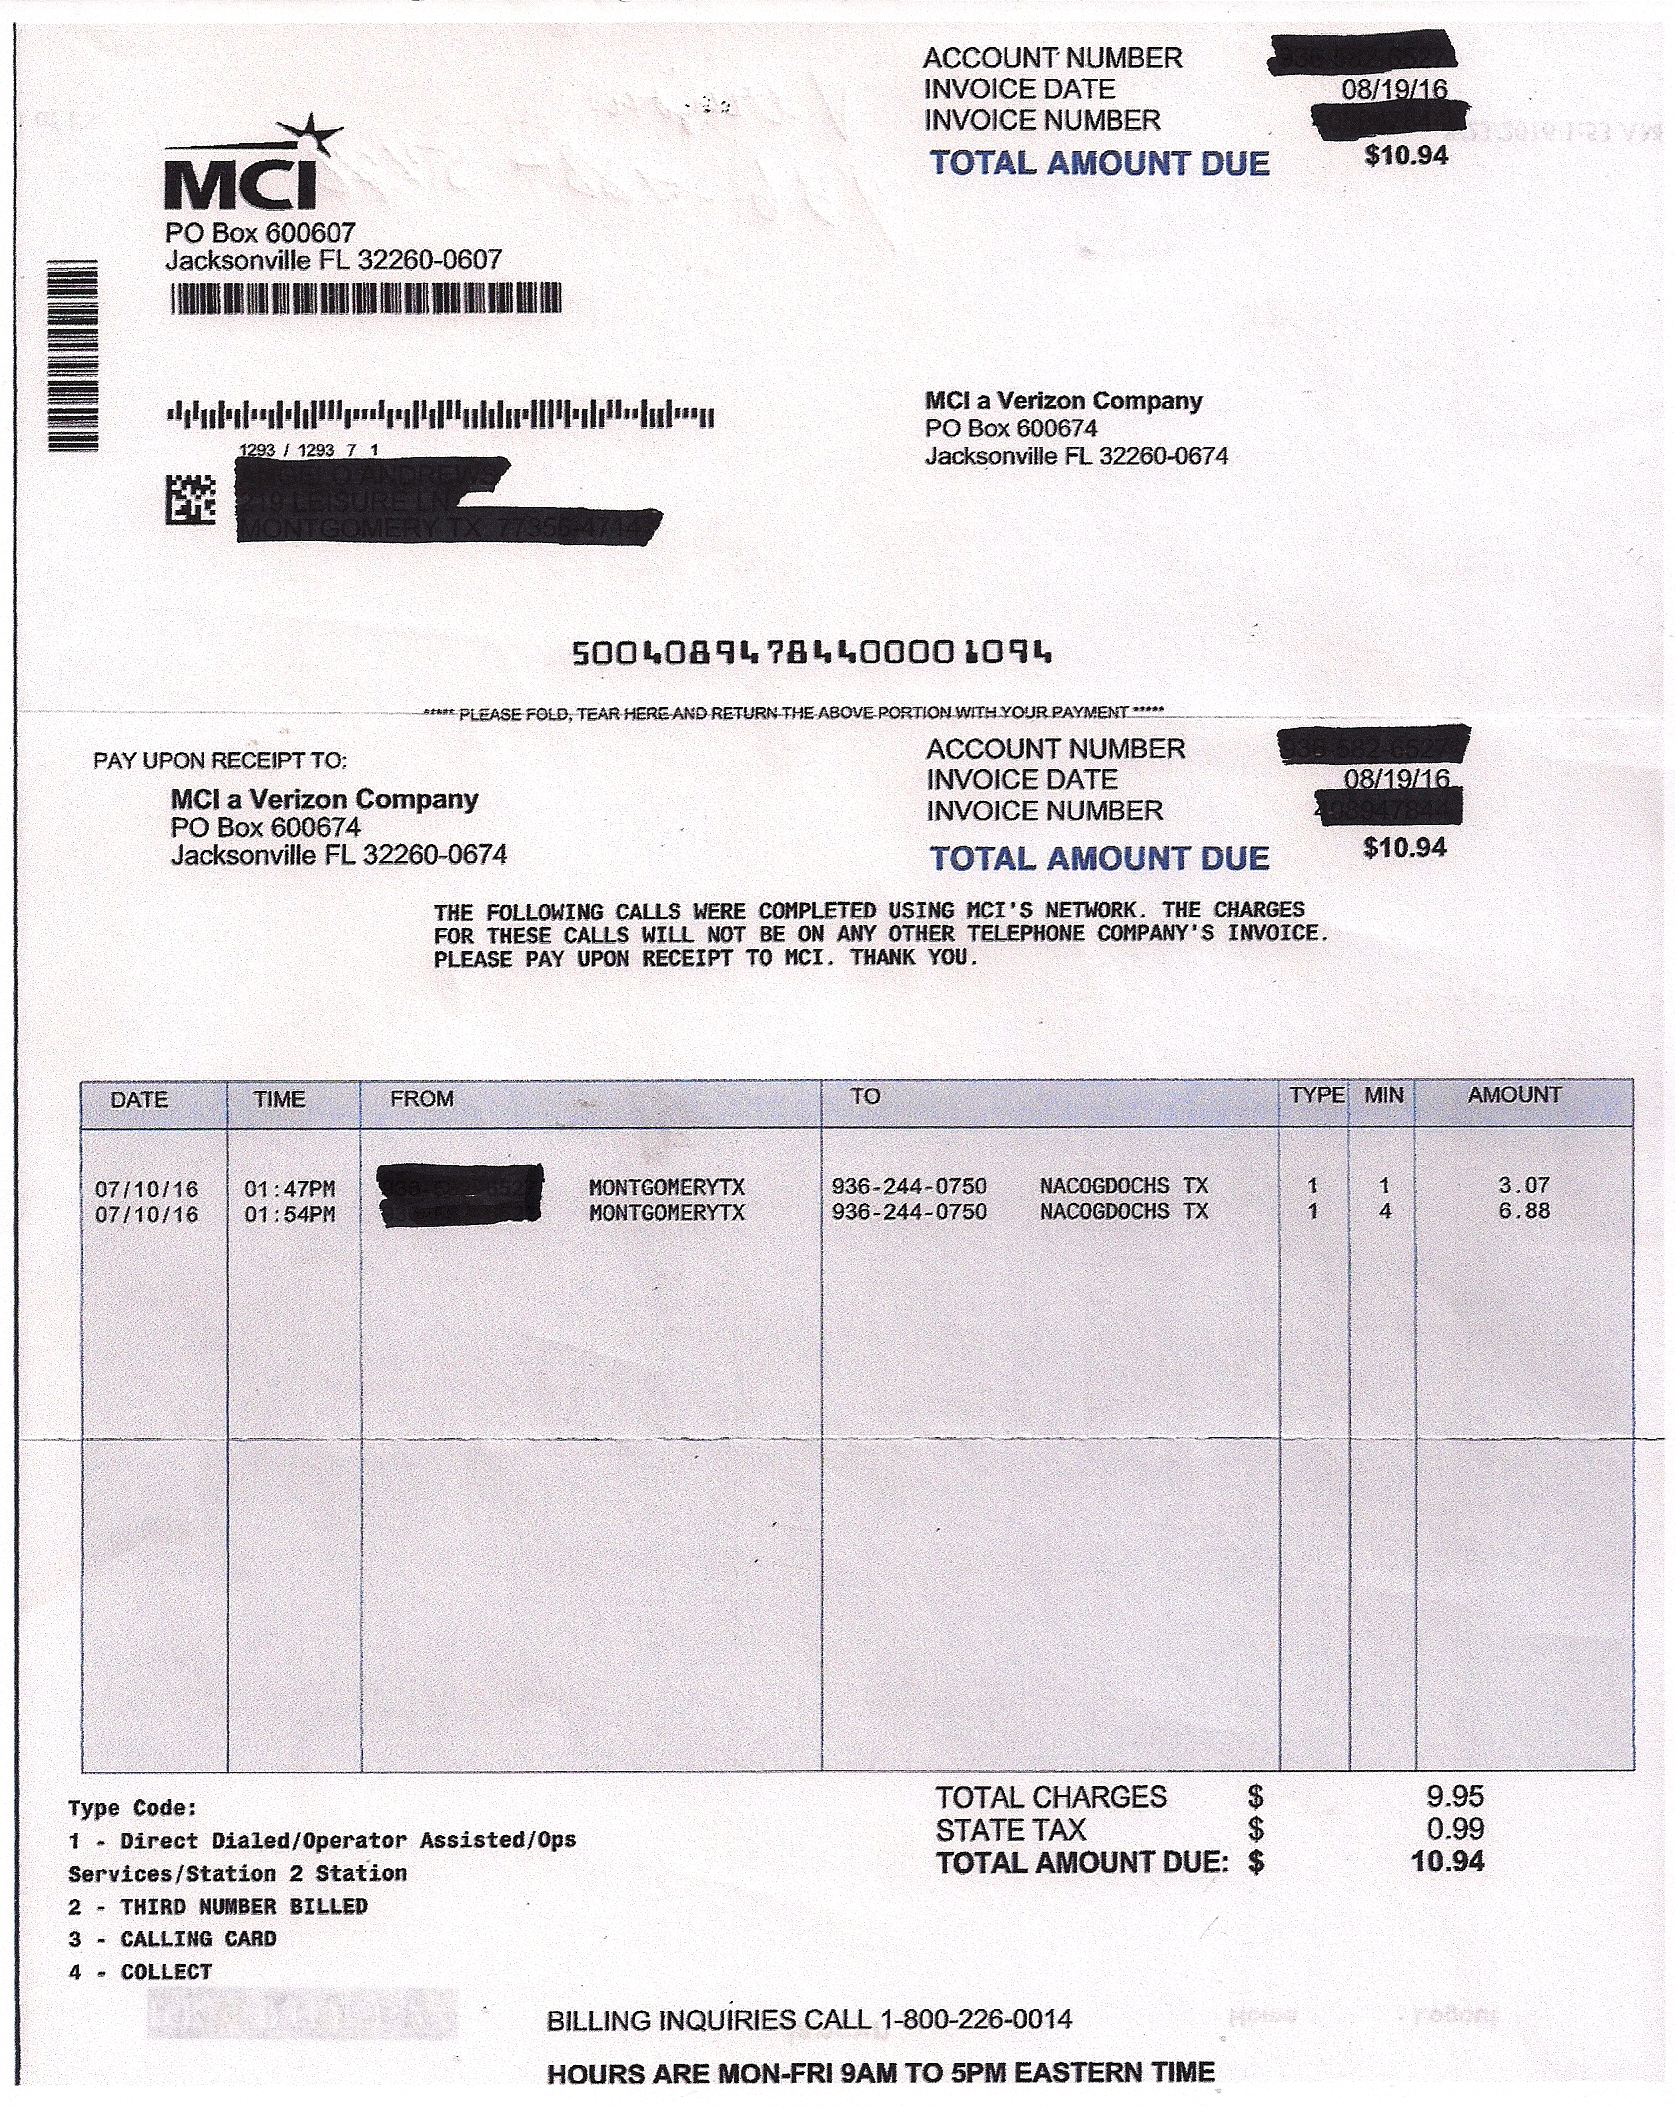 The invoice that was received.